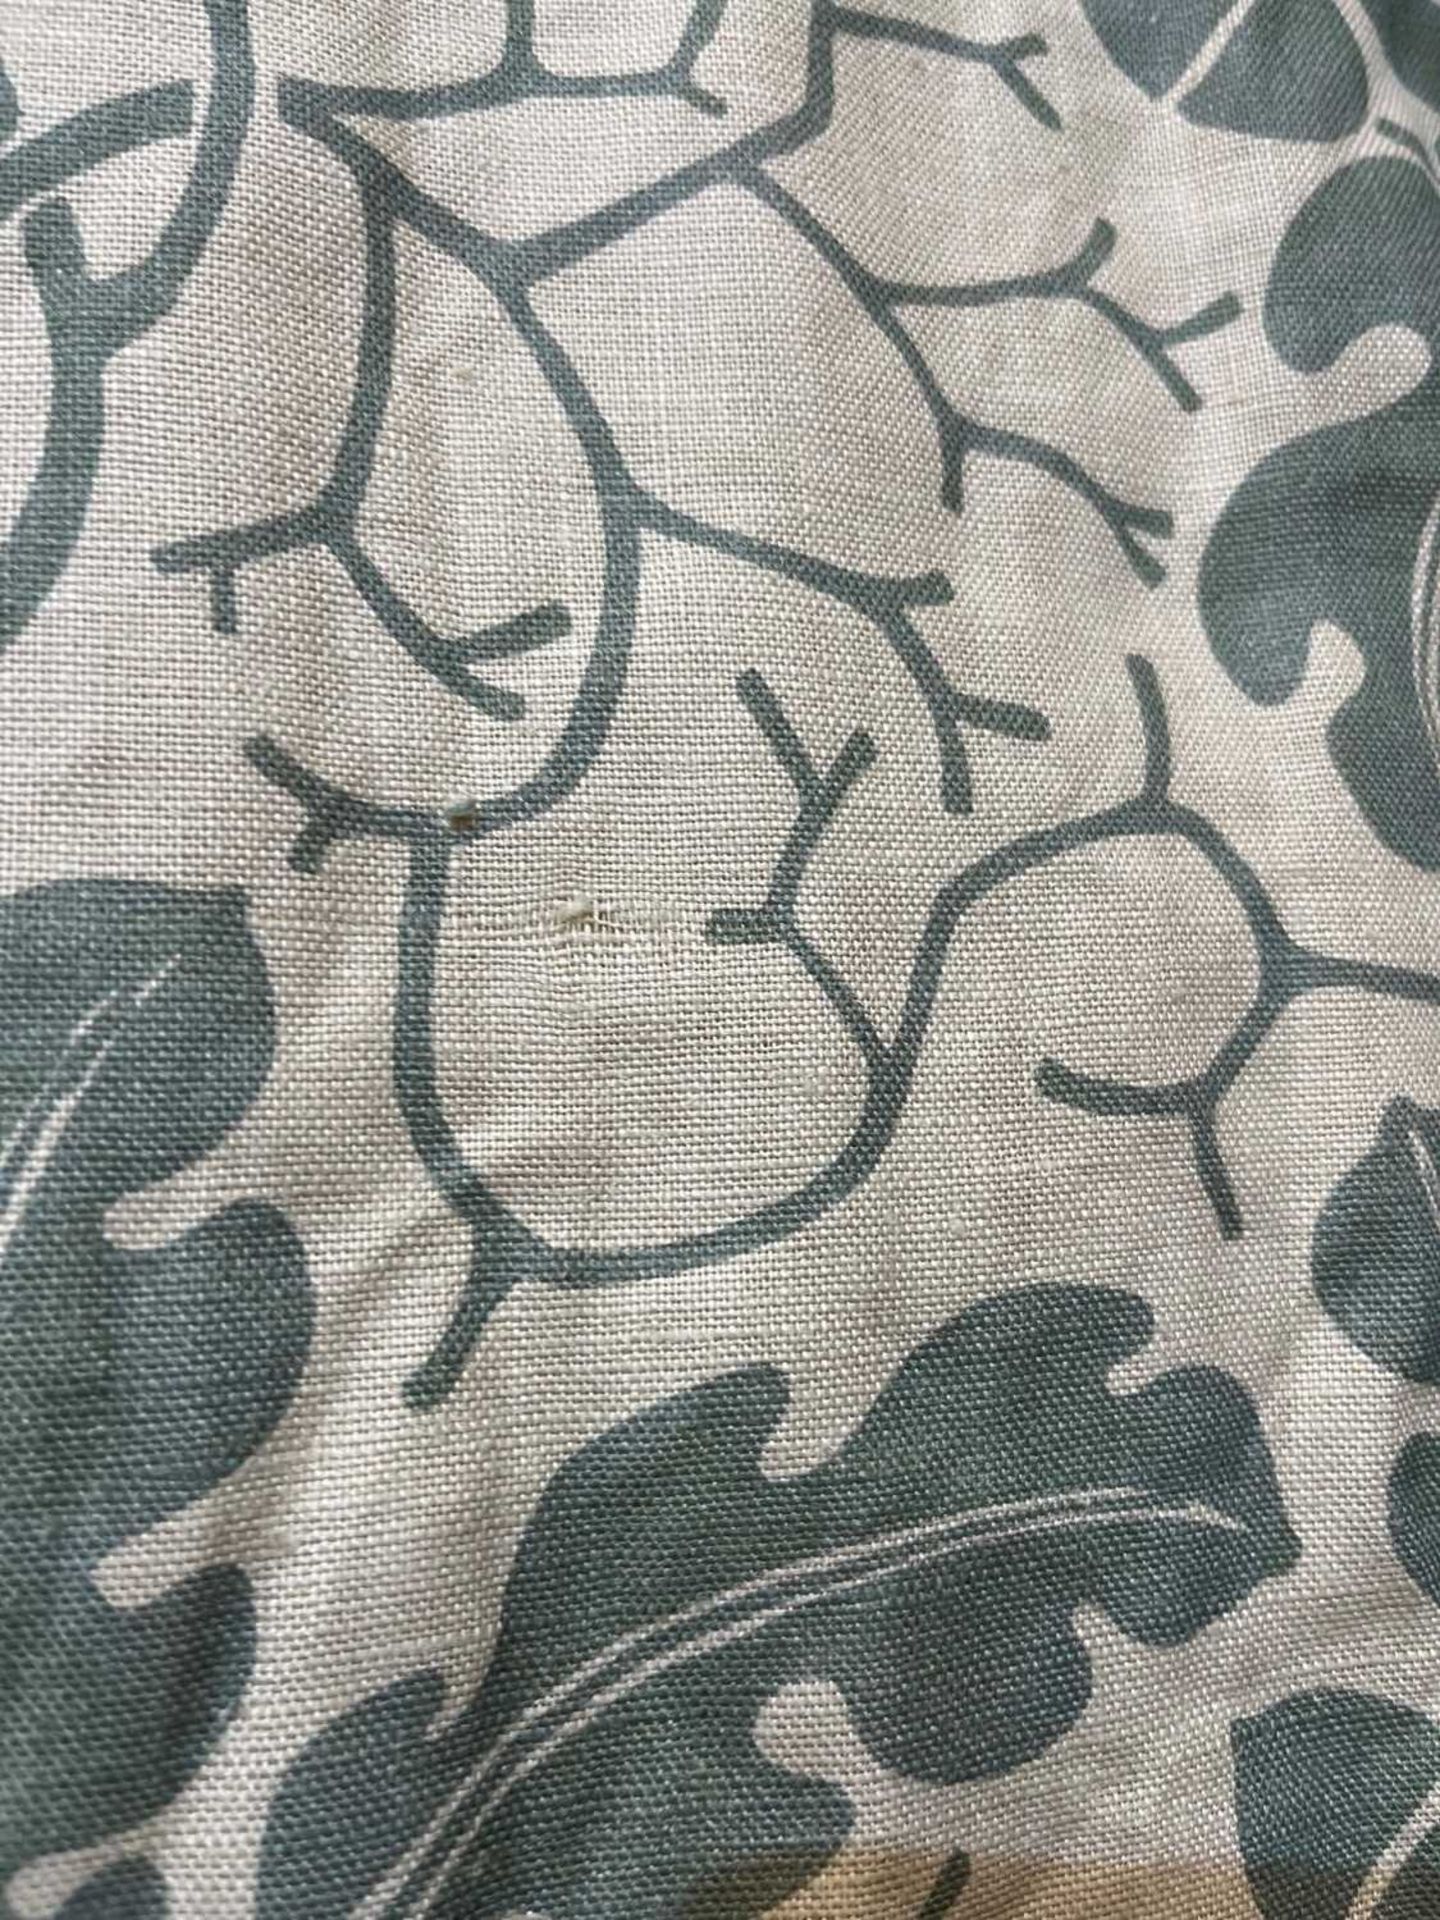 Two pairs of 'Oak Leaves' curtains by Robert Kime, - Image 12 of 14